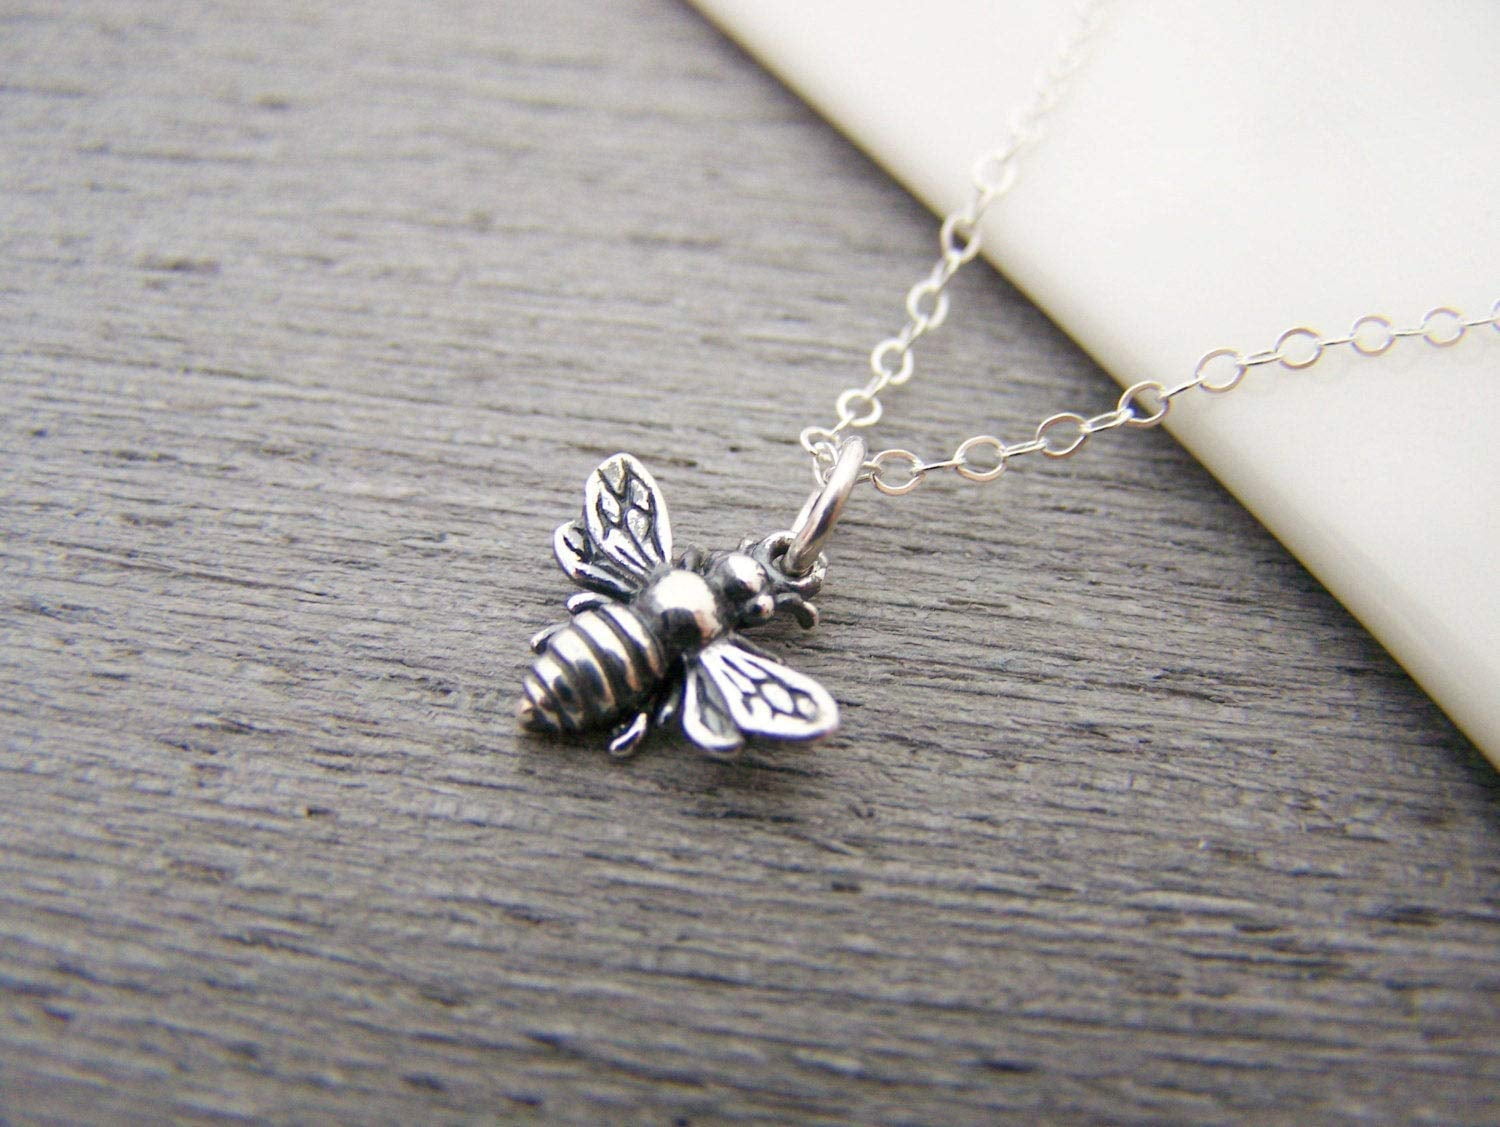 Sterling Silver Bumble Bee Necklace - The Perfect Keepsake Gift